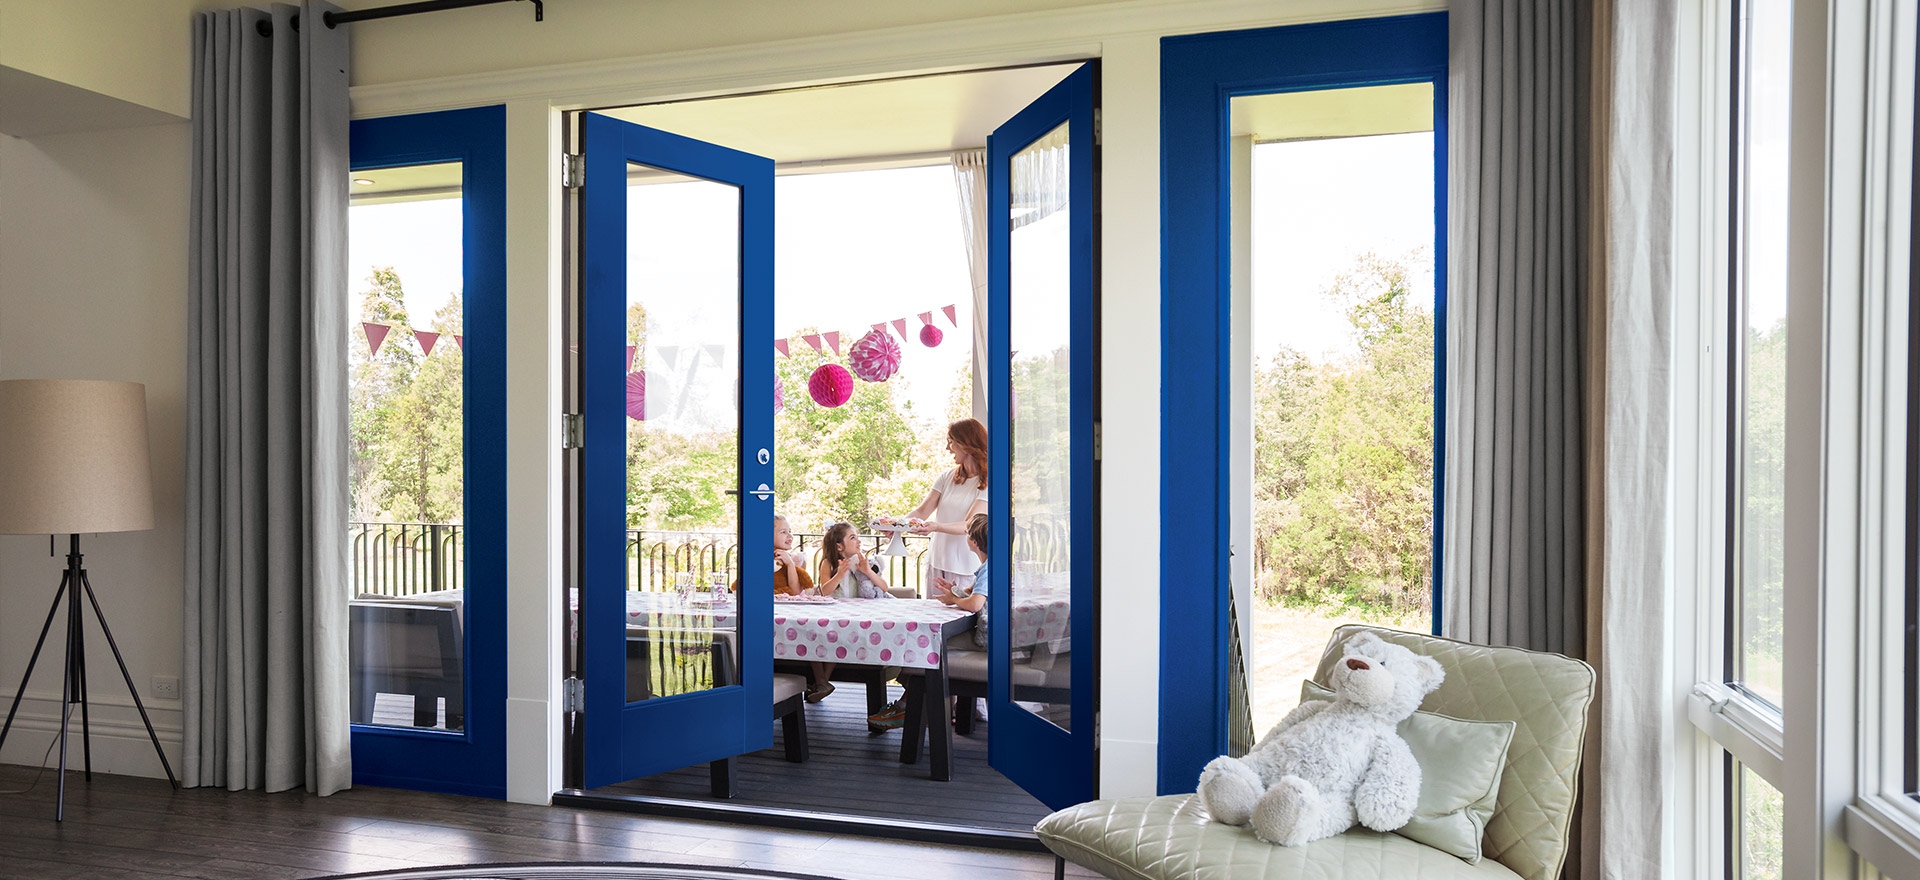 Full lite exterior blue VistaGrande double doors open view of a little girl's party with pink décor